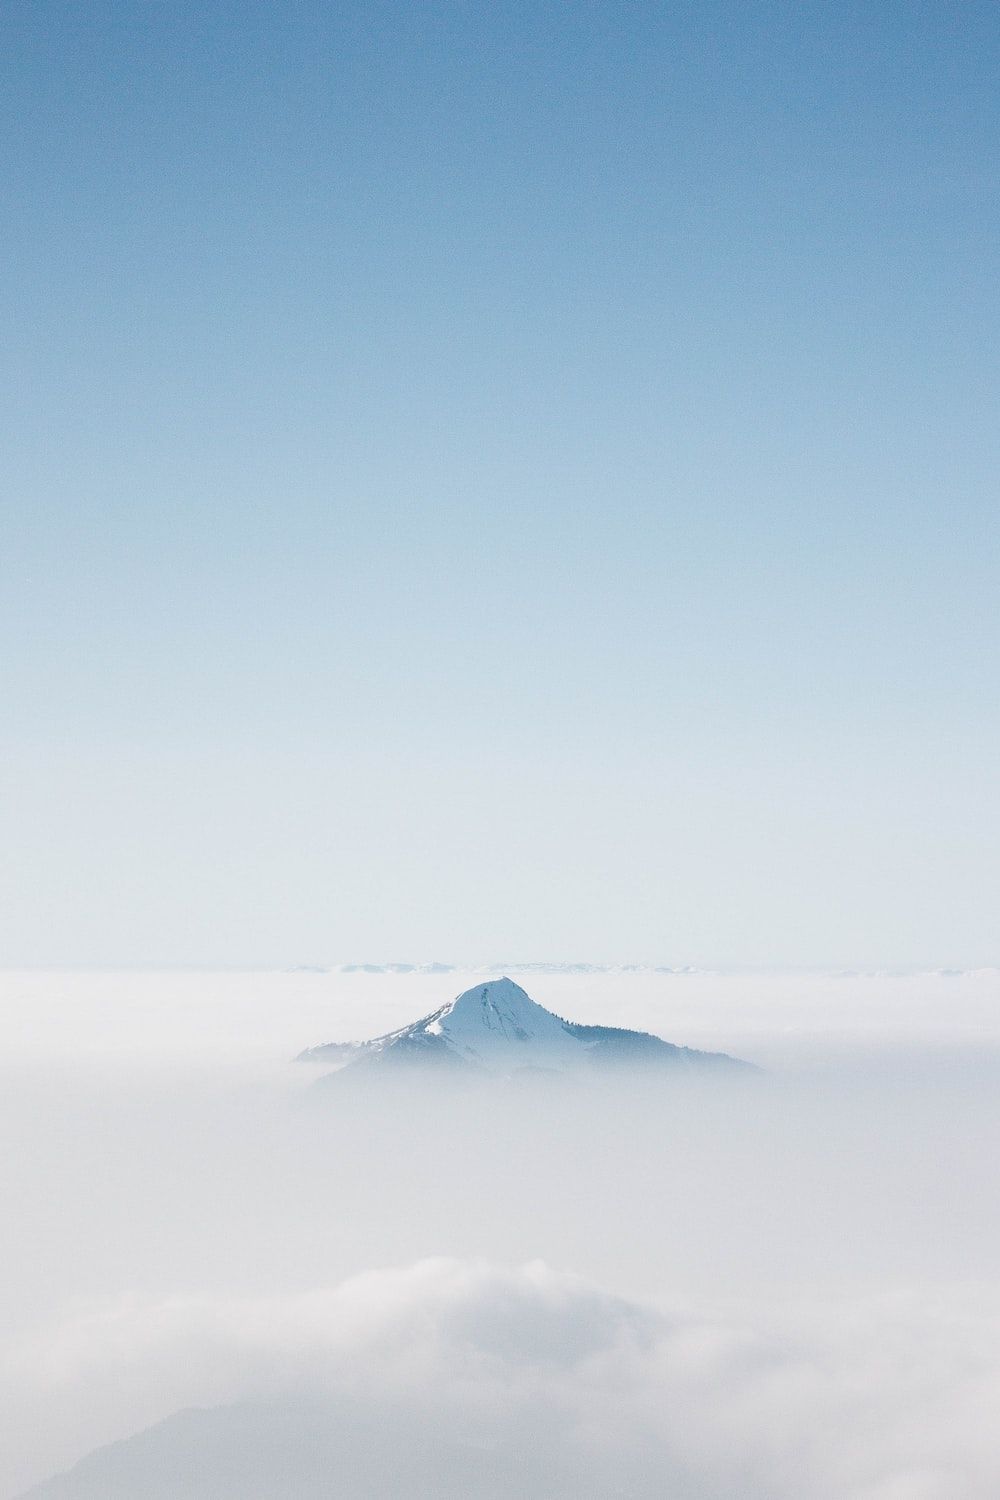 A person is standing on top of the mountain - Blue, pastel blue, dark blue, light blue